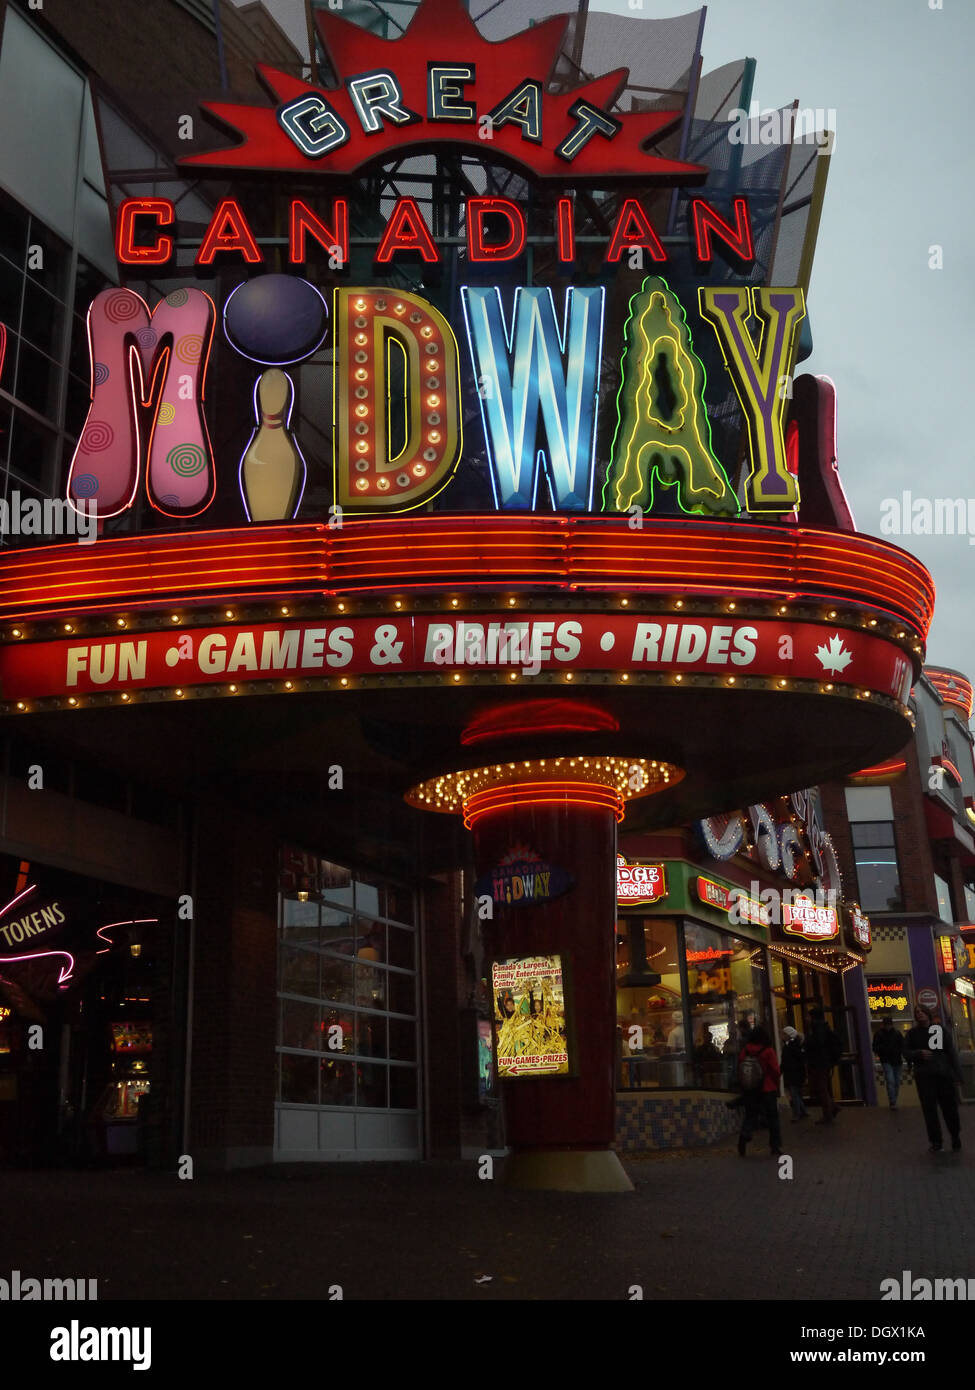 Clifton hill great canadian midway entertainment complex Stock Photo